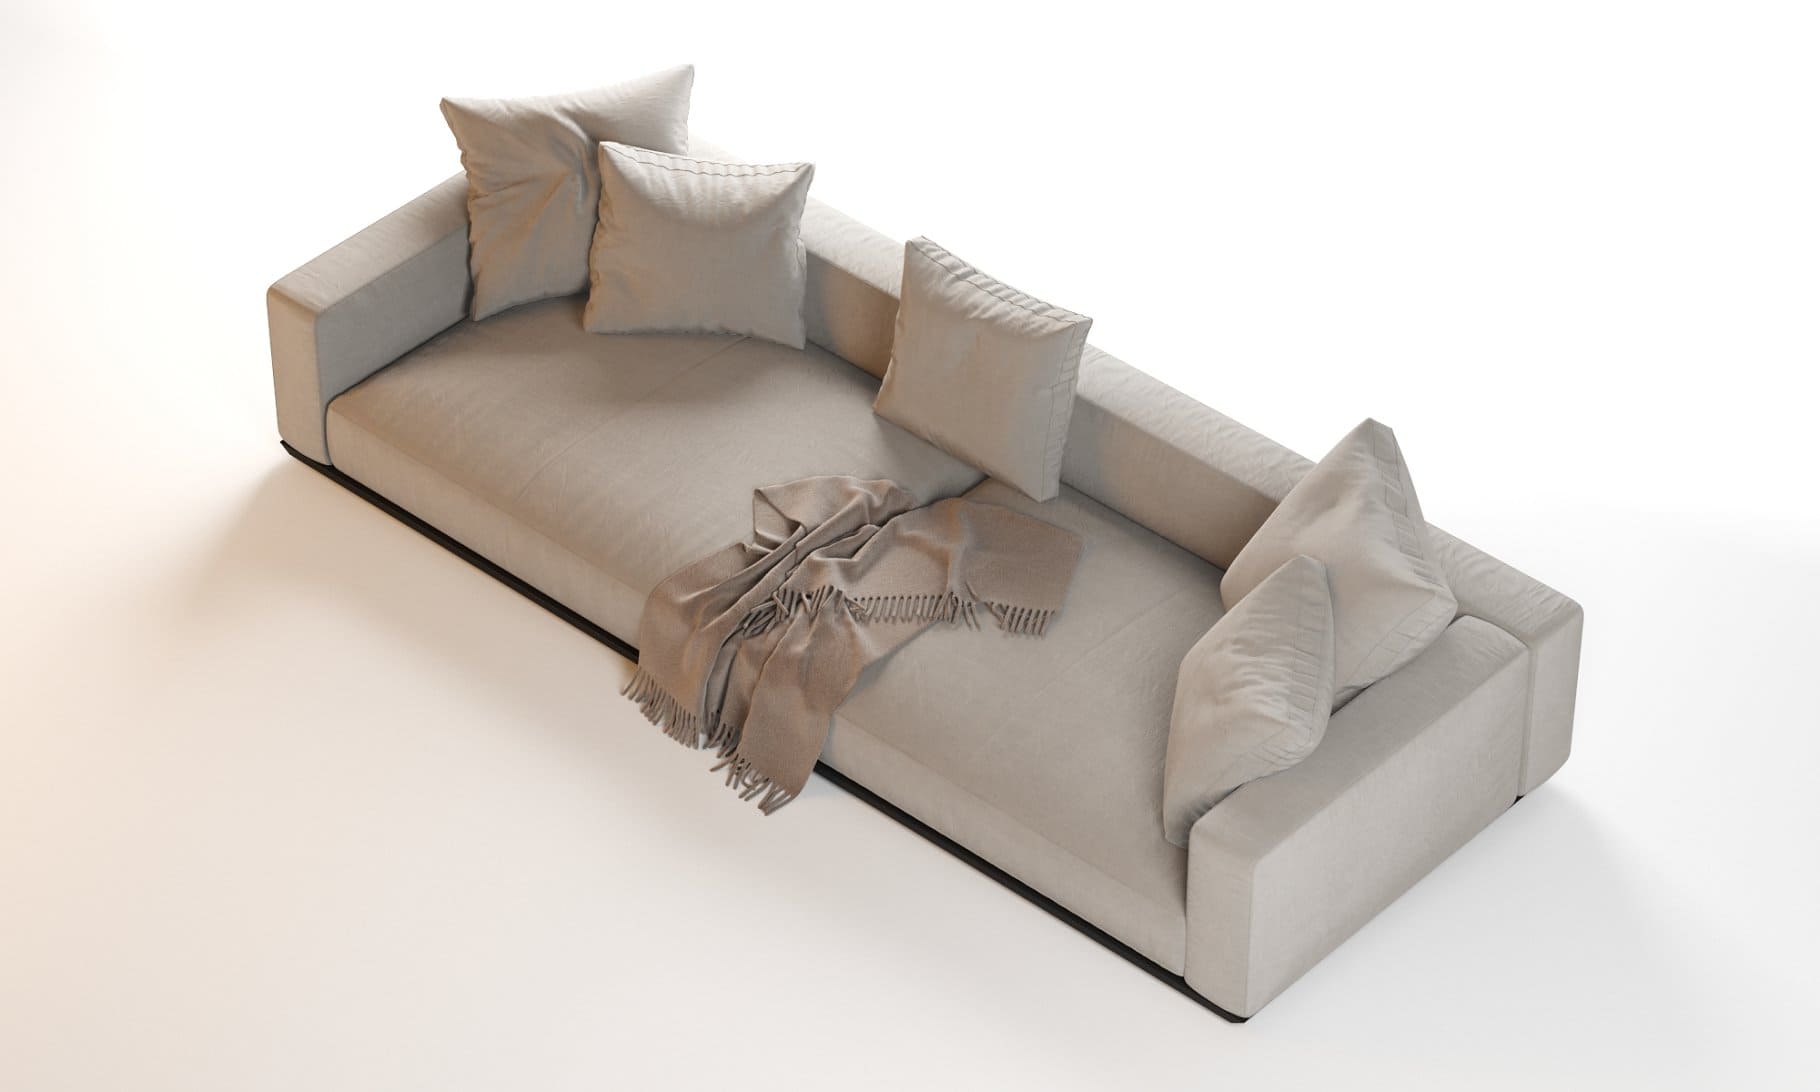 Top view of the Flexform Grandemare Sectional Sofa.